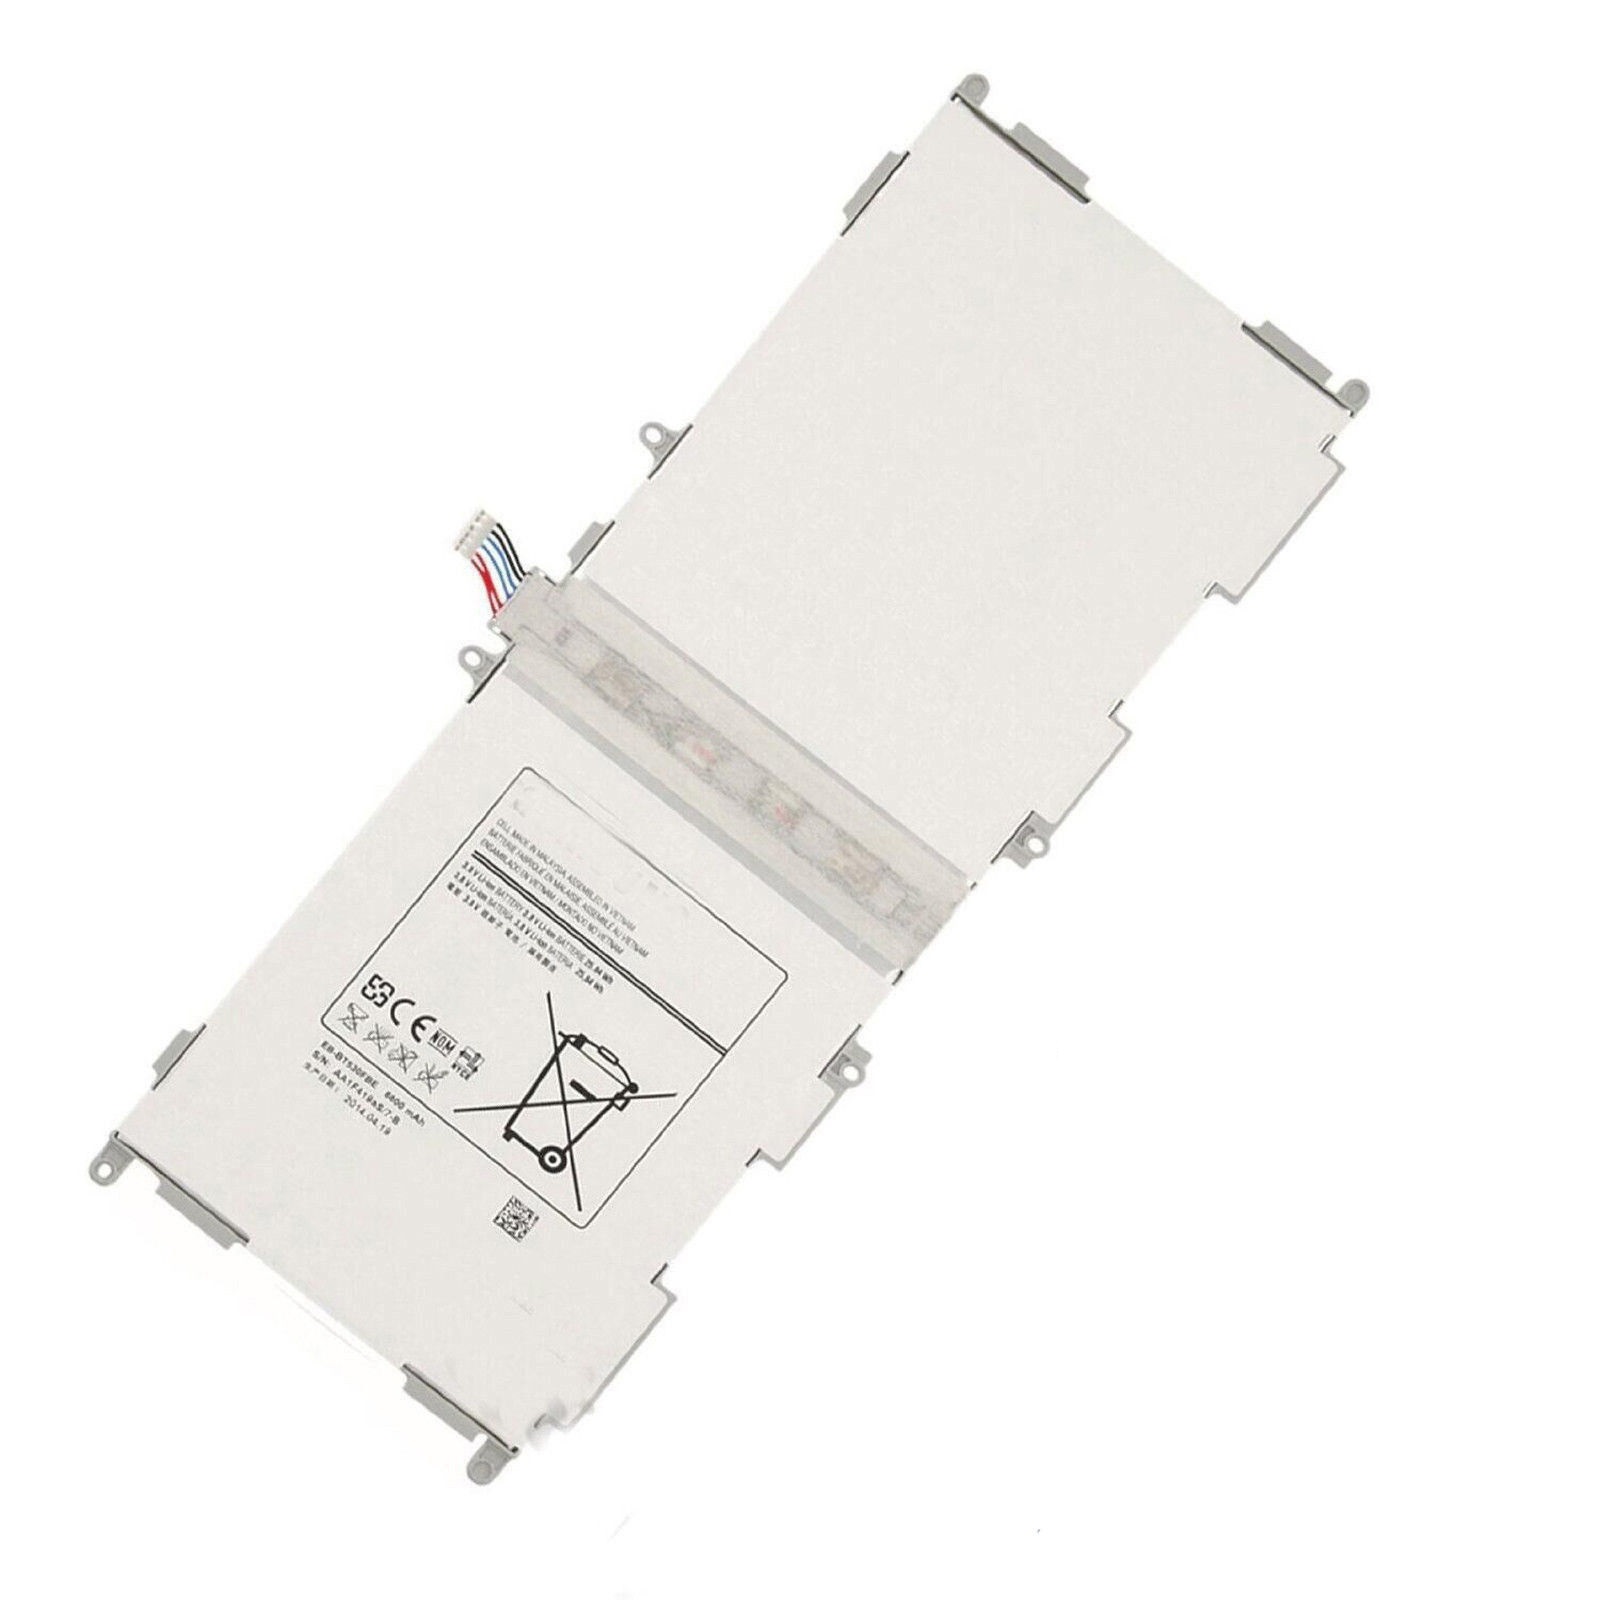 EB-BT530FBE Samsung Galaxy Tab 4 10.1" T530 SM-T530NU T535 remplacement Battery